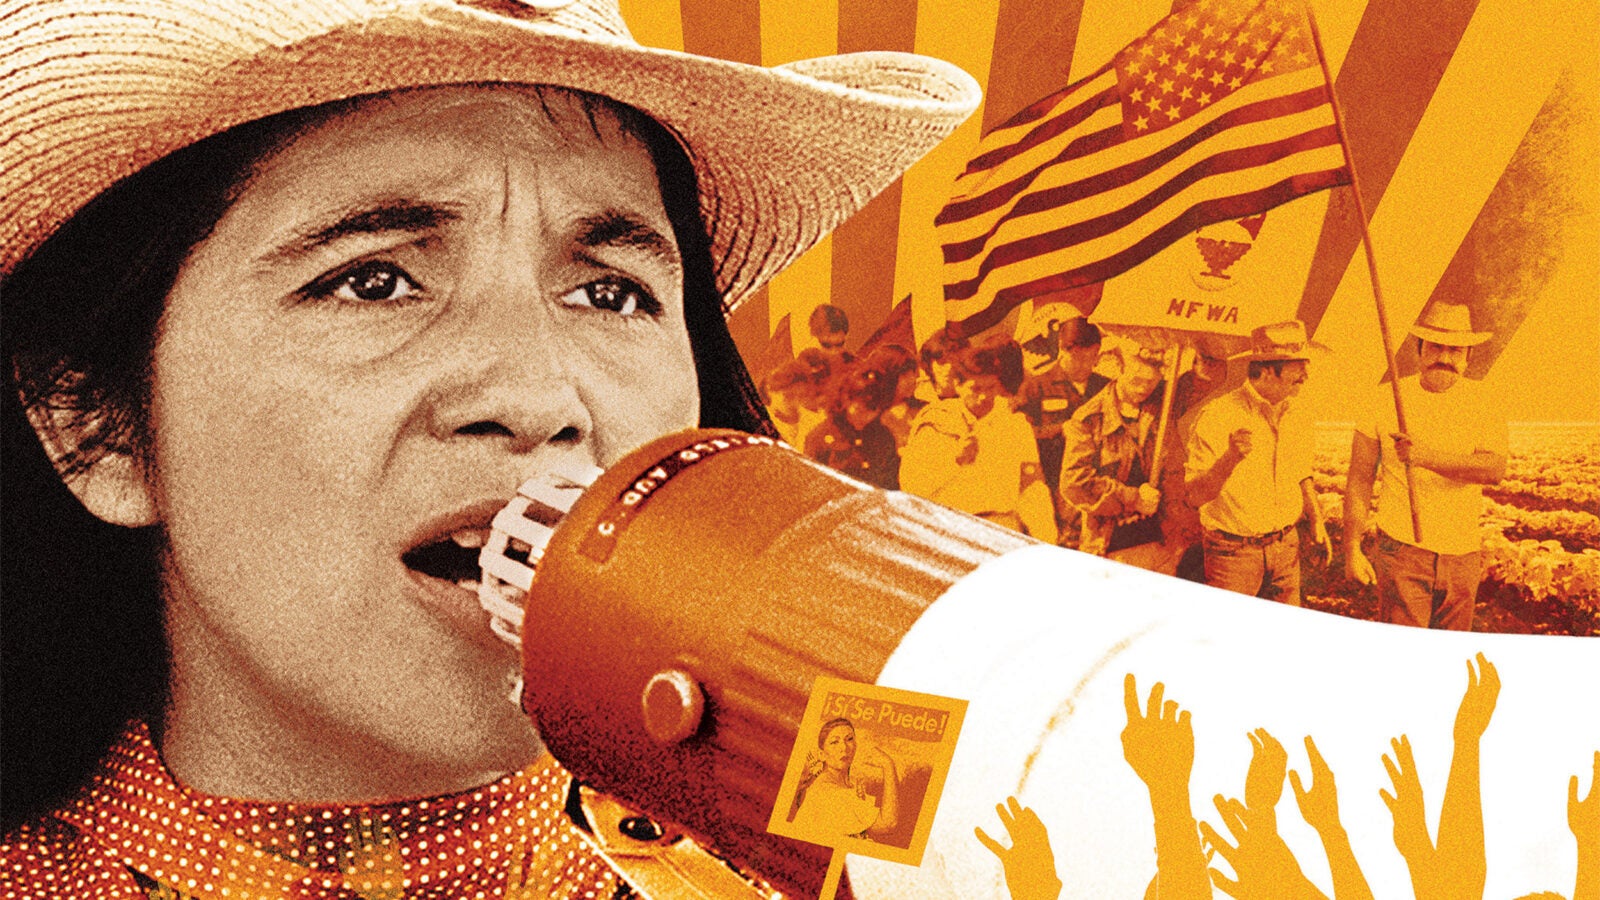 Raising 11 children while wrestling with gender bias, union defeat and victory,  Dolores Huerta was an equal partner in co-founding the first farm workers unions with Cesar Chavez. She will be honored with the Radcliffe Medal in May.